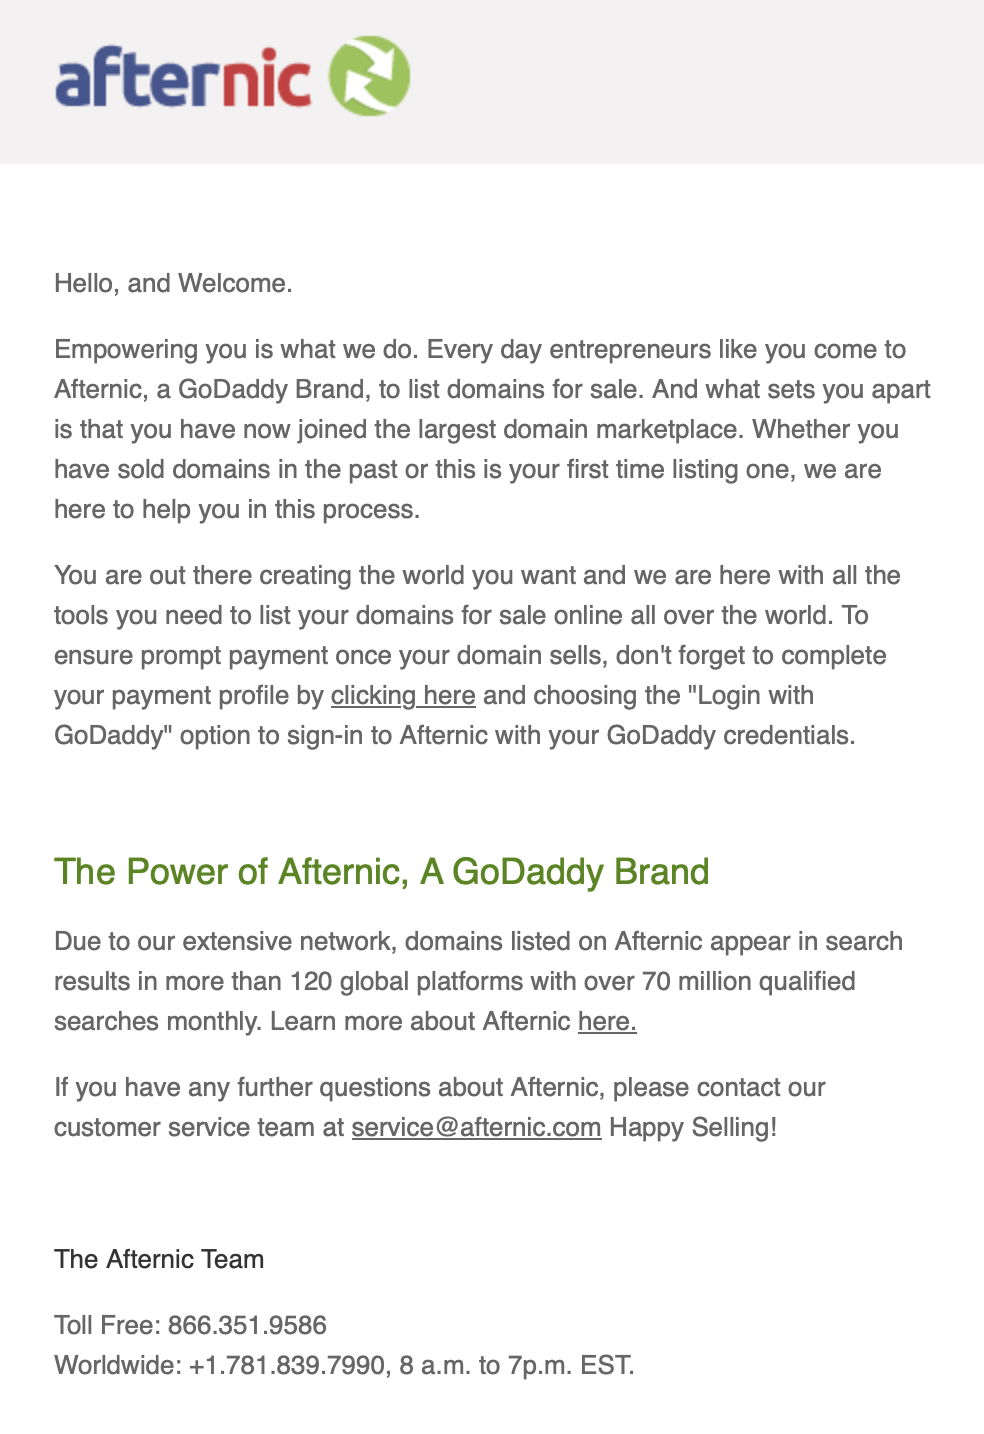 Email from Afternic